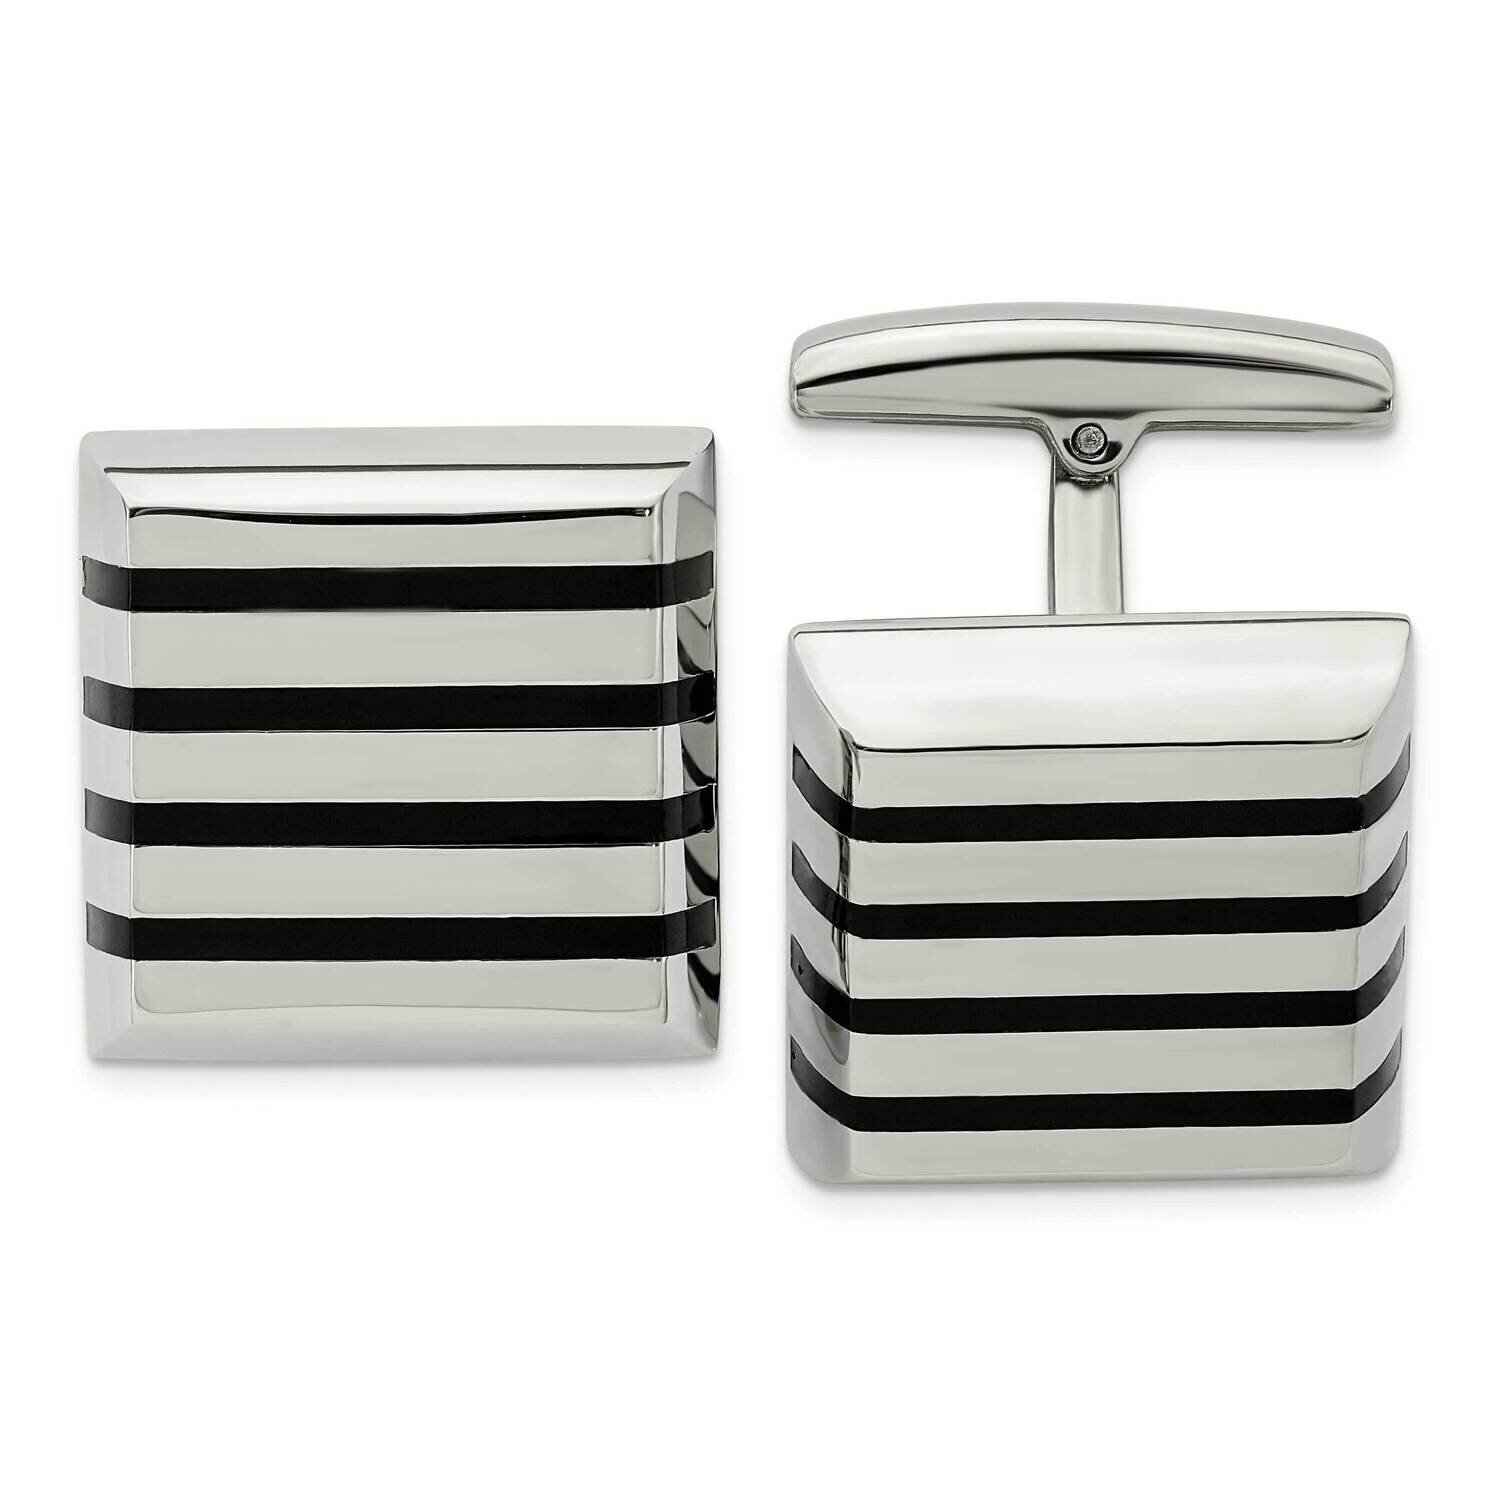 Black Rubber Square Cufflinks Stainless Steel Polished SRC331